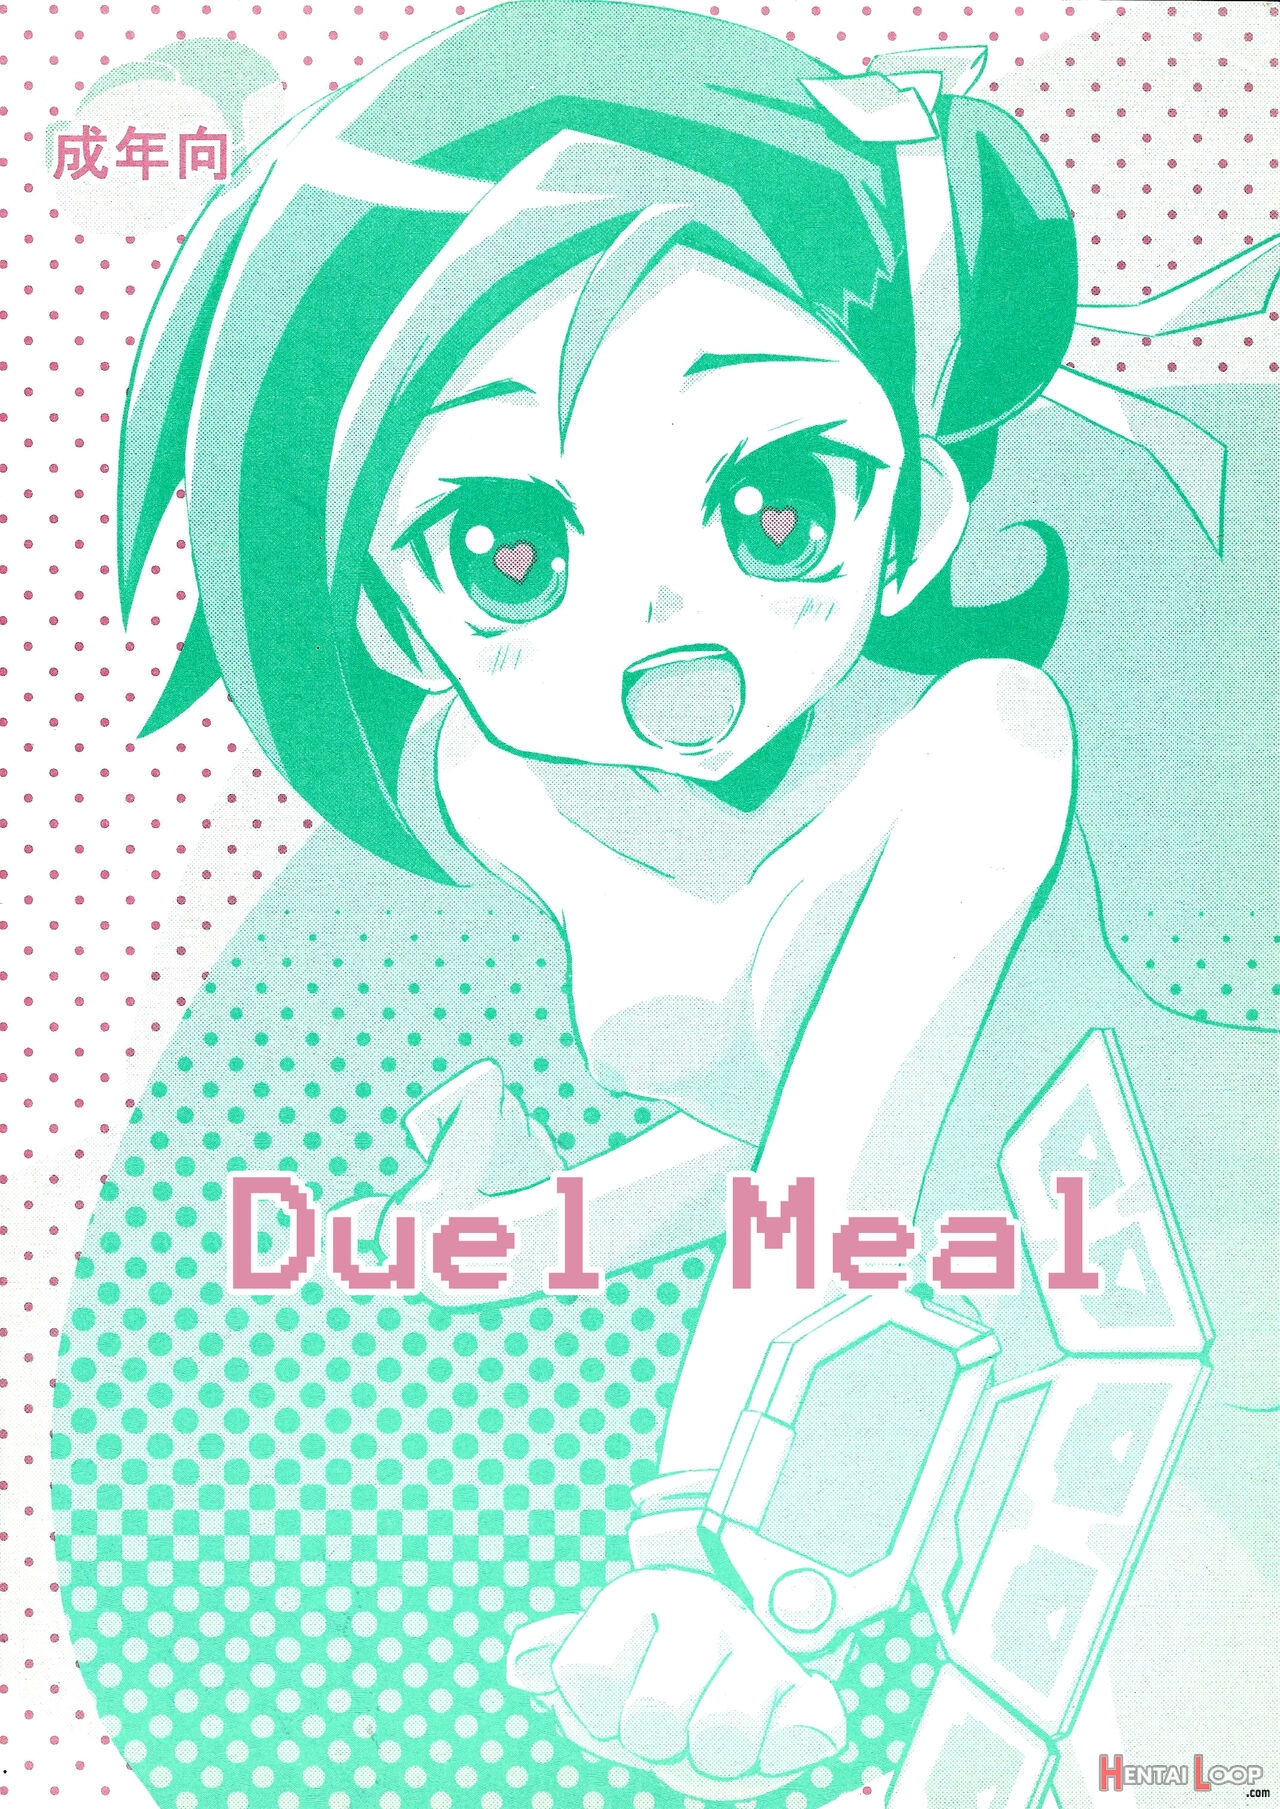 Duel Meal page 1